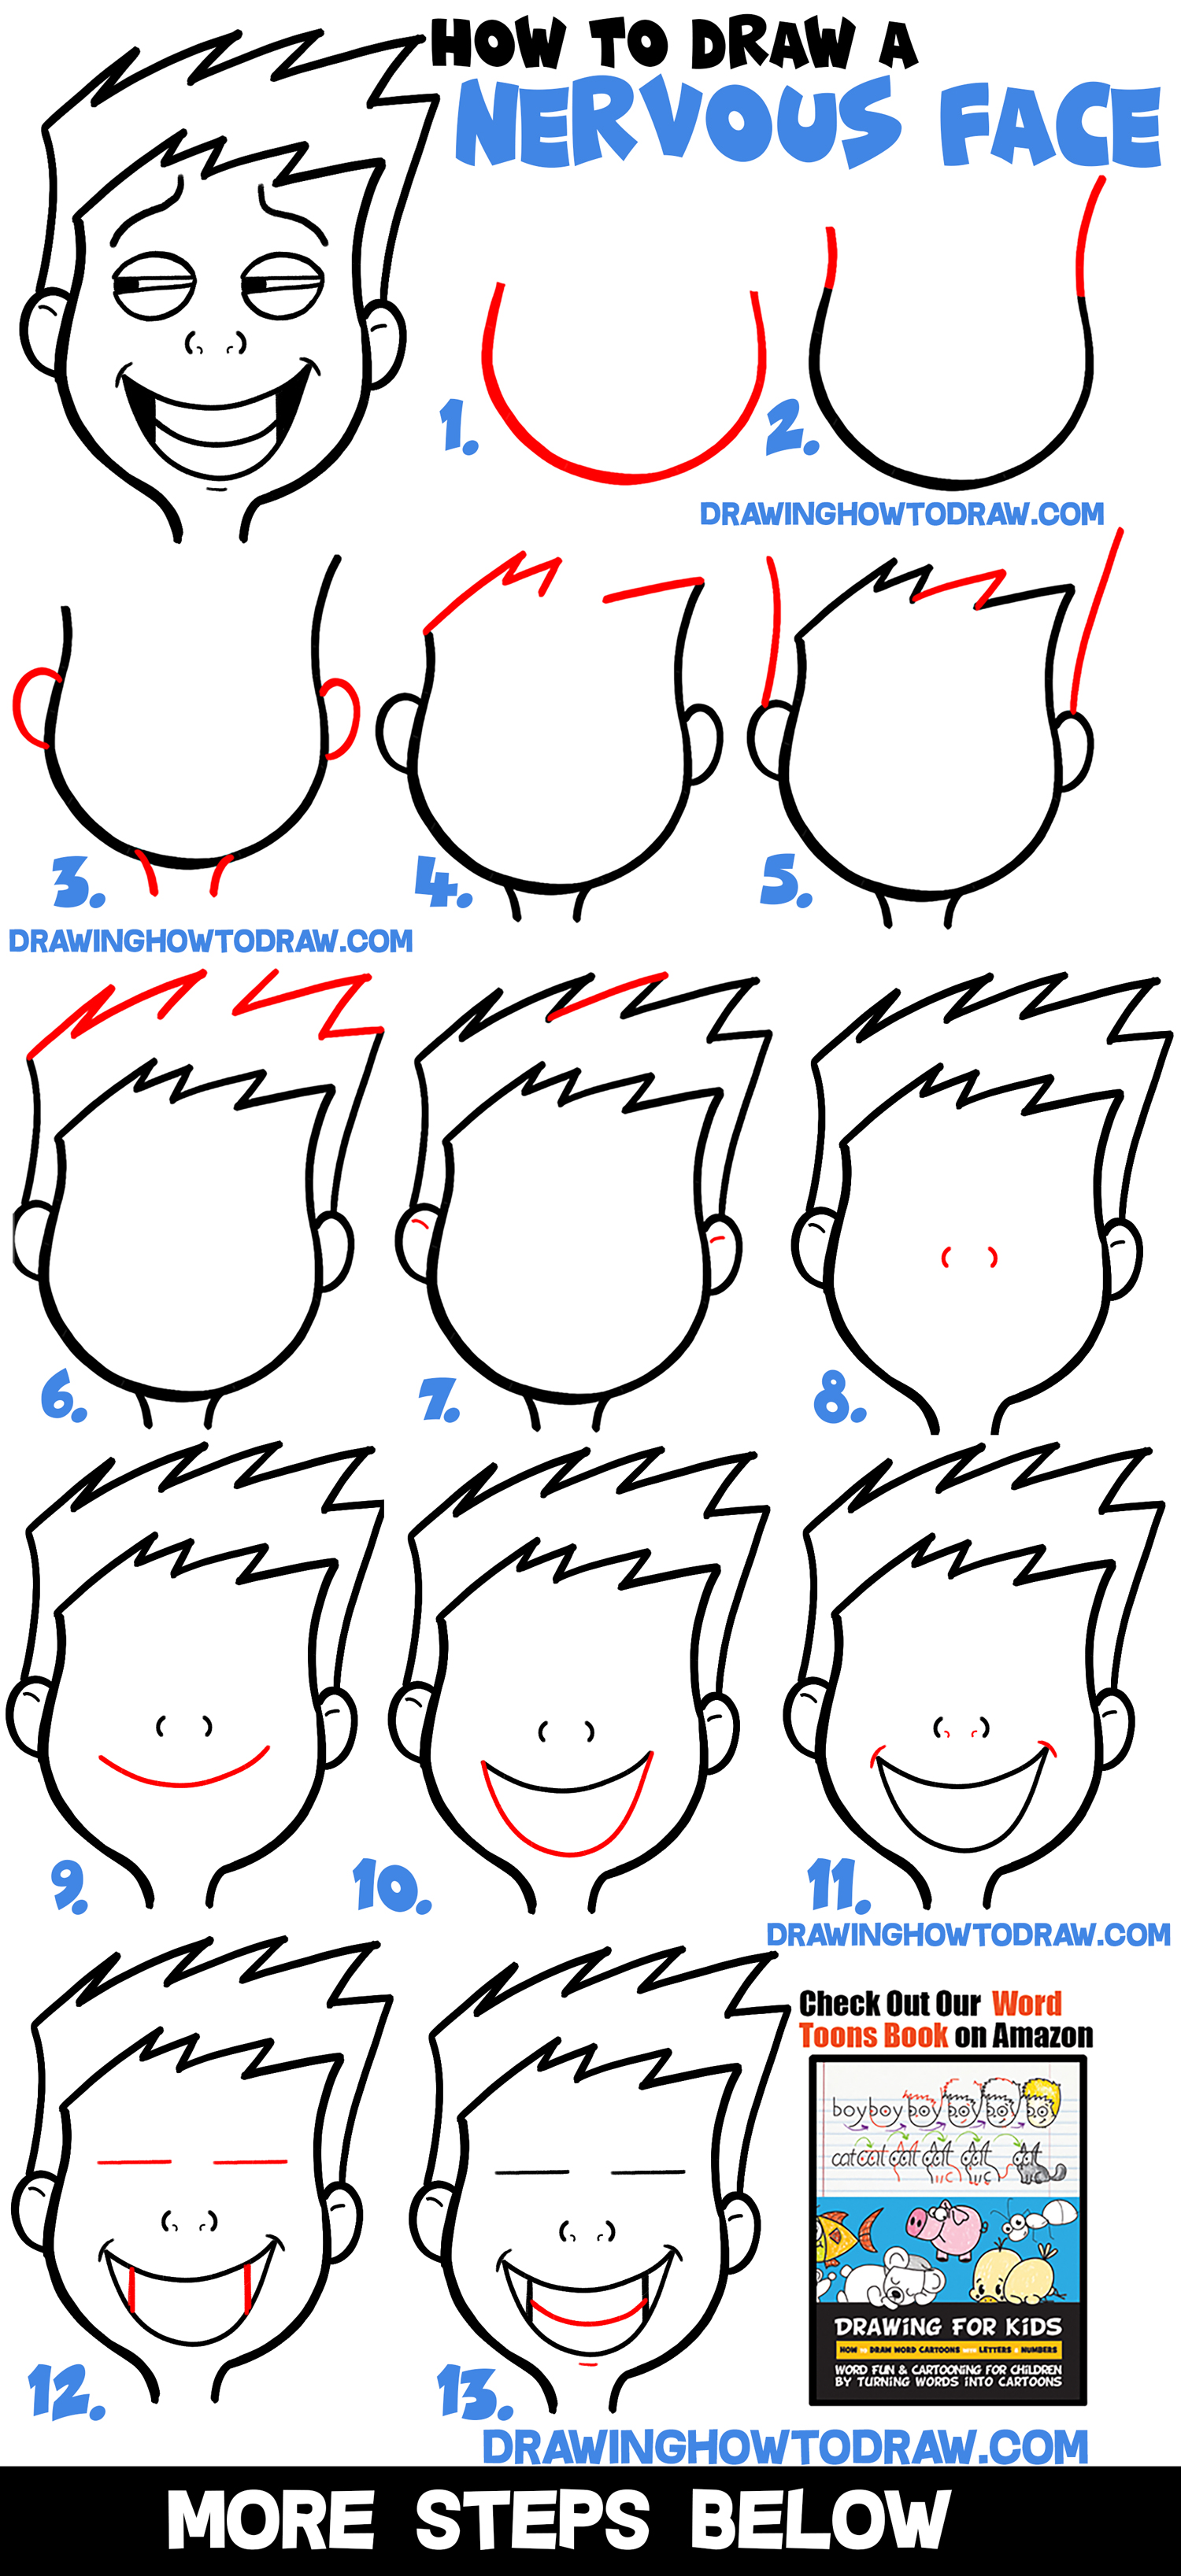 How to Draw Cartoon Facial Expressions Uneasy,